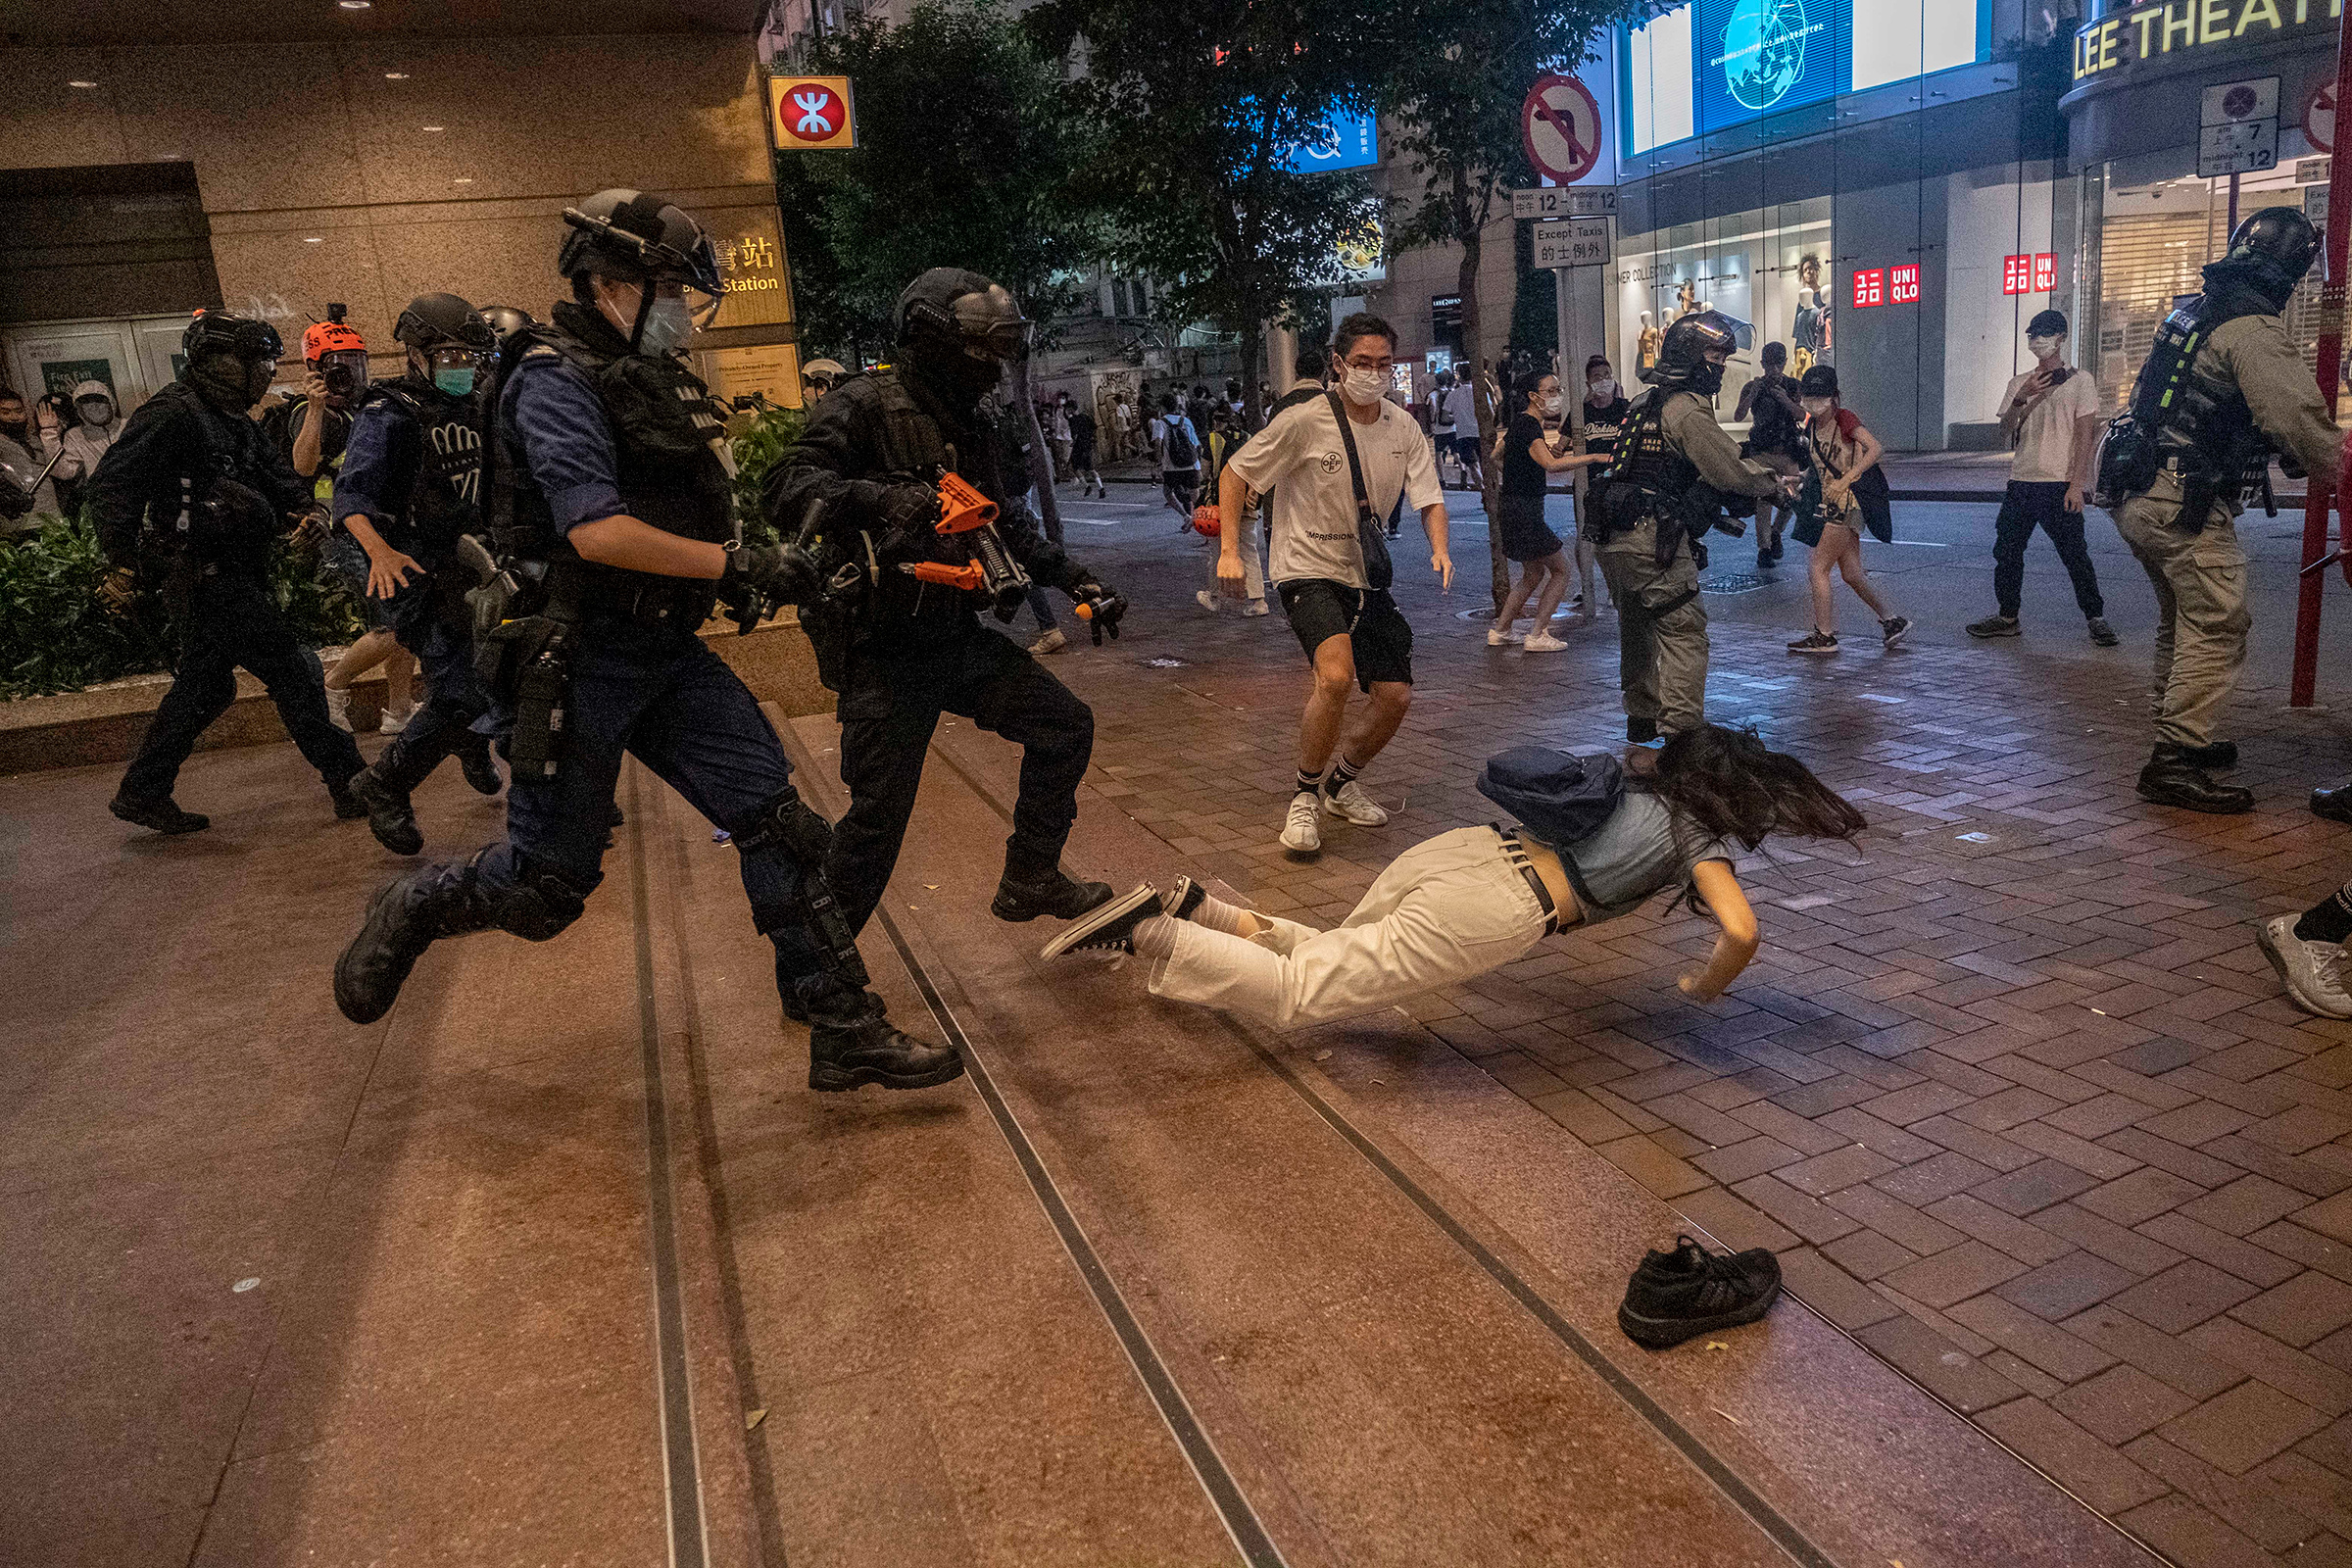 Police clash with protesters in Hong Kong on July 1, 2020, one day after a new national security law went into effect. The city immediately felt the chilling effect of Beijing's offensive to quash dissent in the semiautonomous territory.